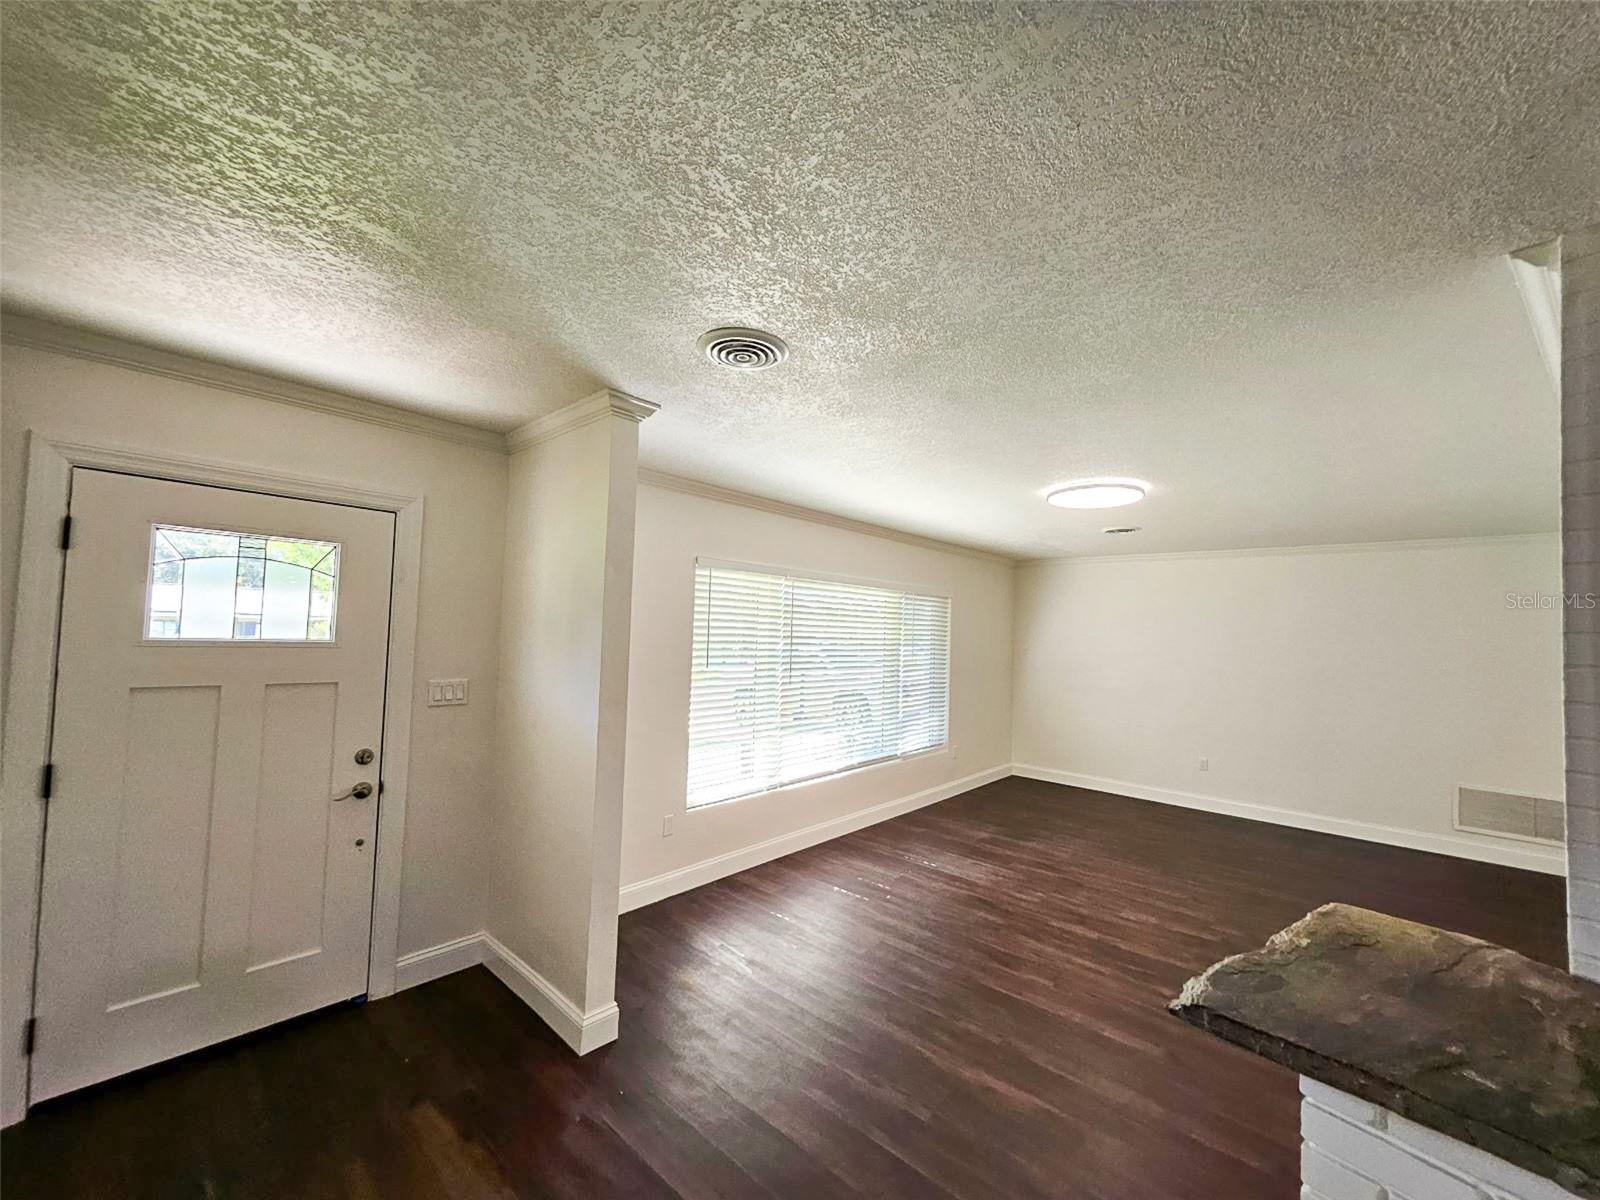 Entry with a large front room that could be a nice office or living room